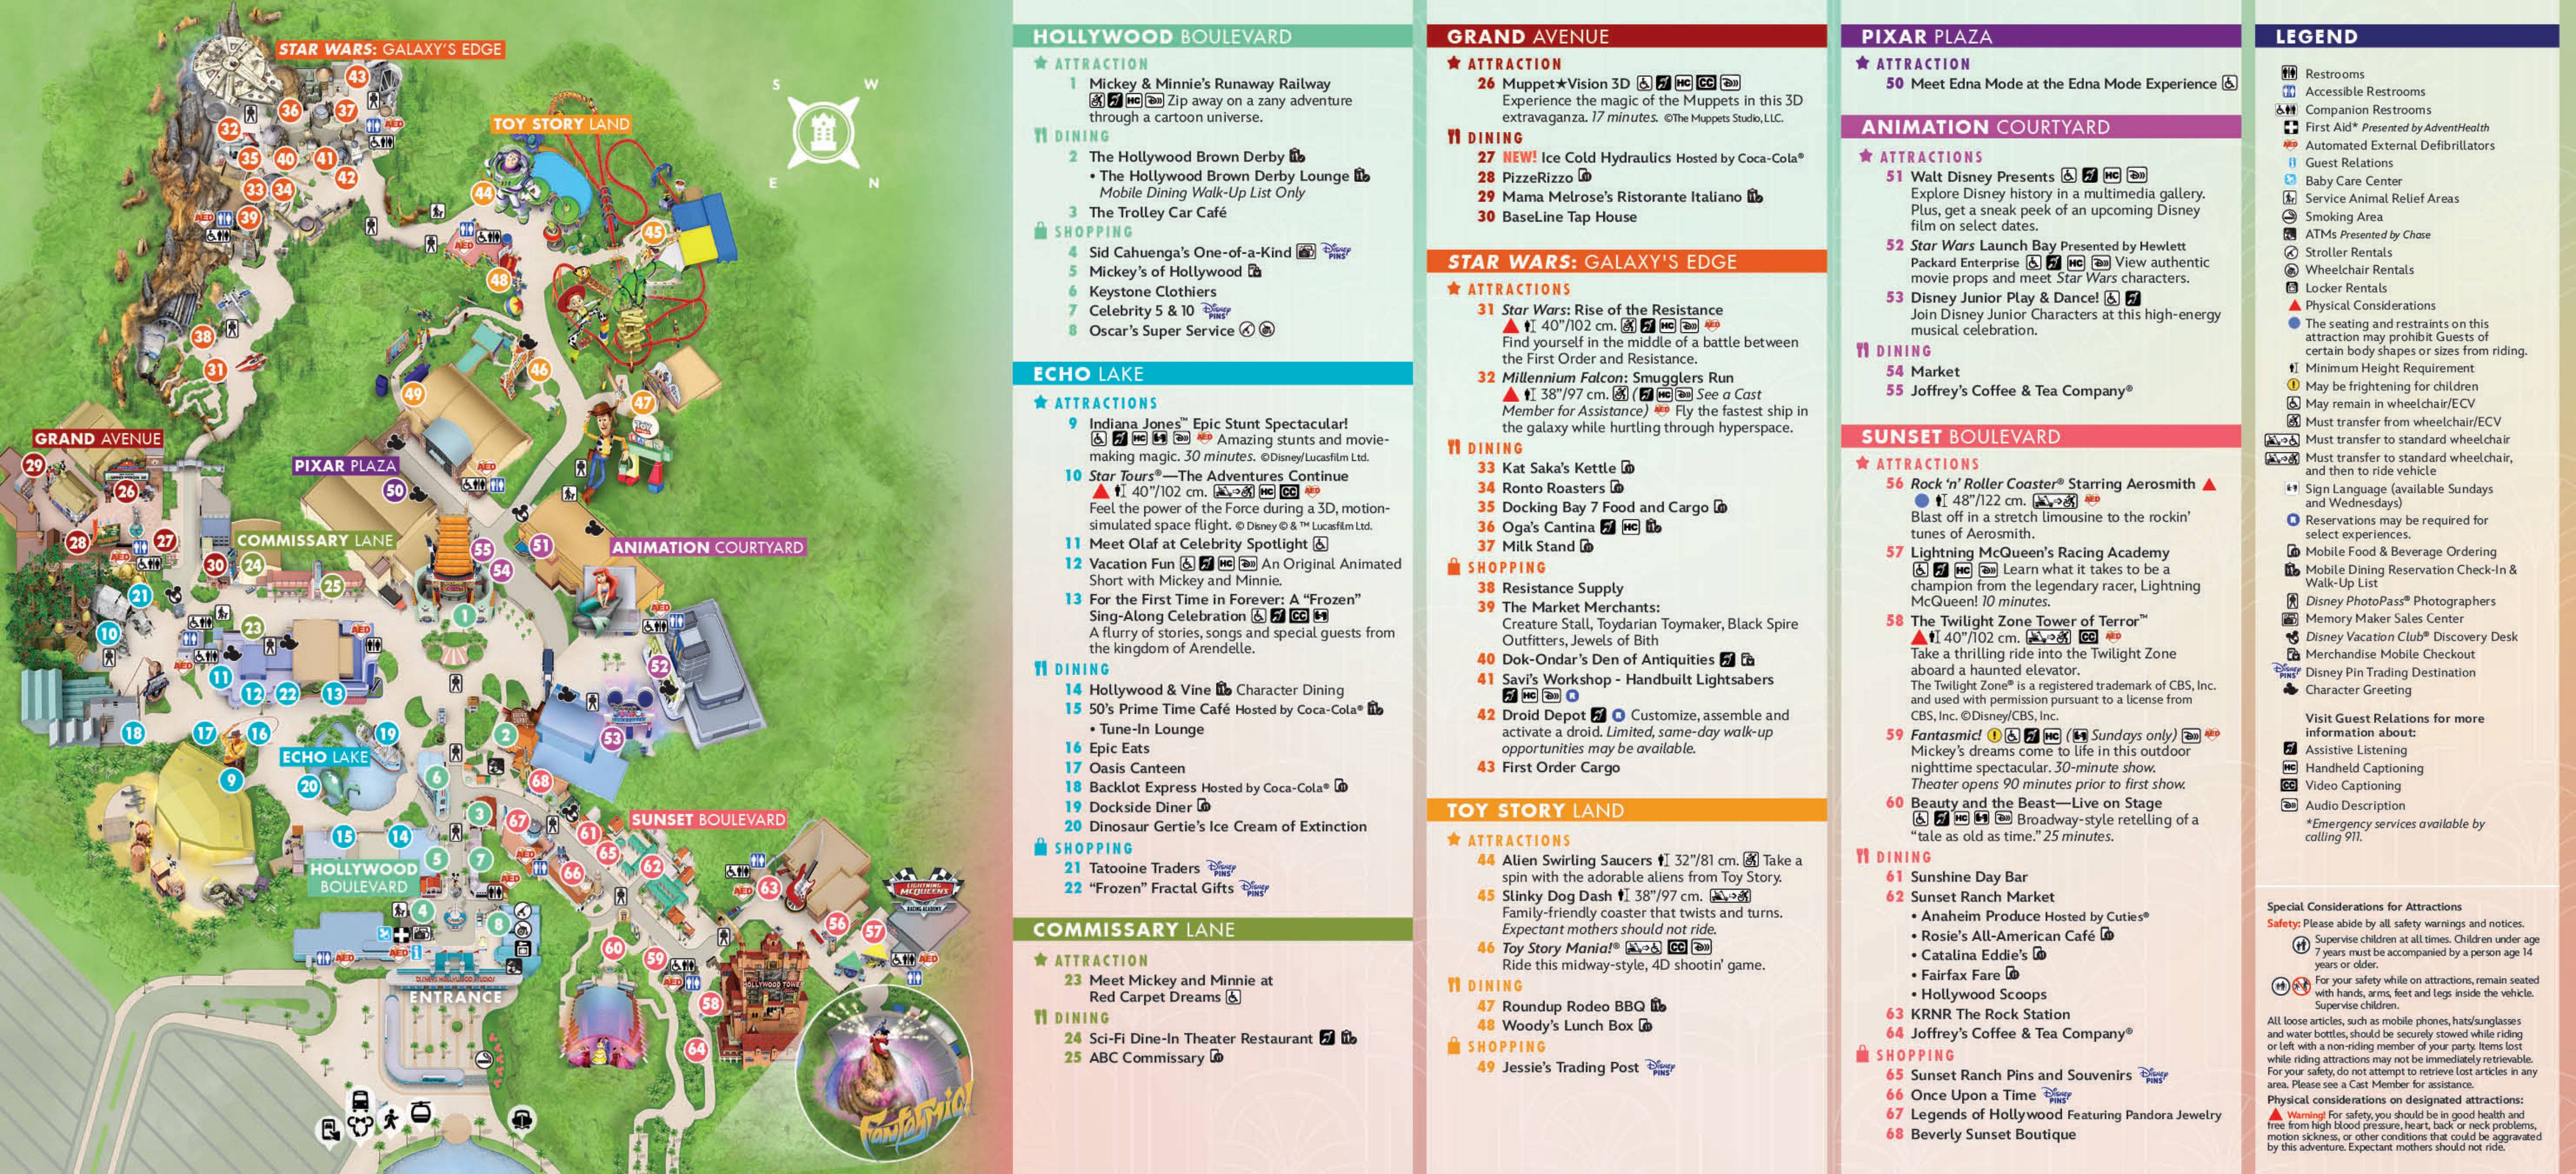 Disney's Hollywood Studios guide map - March 2023